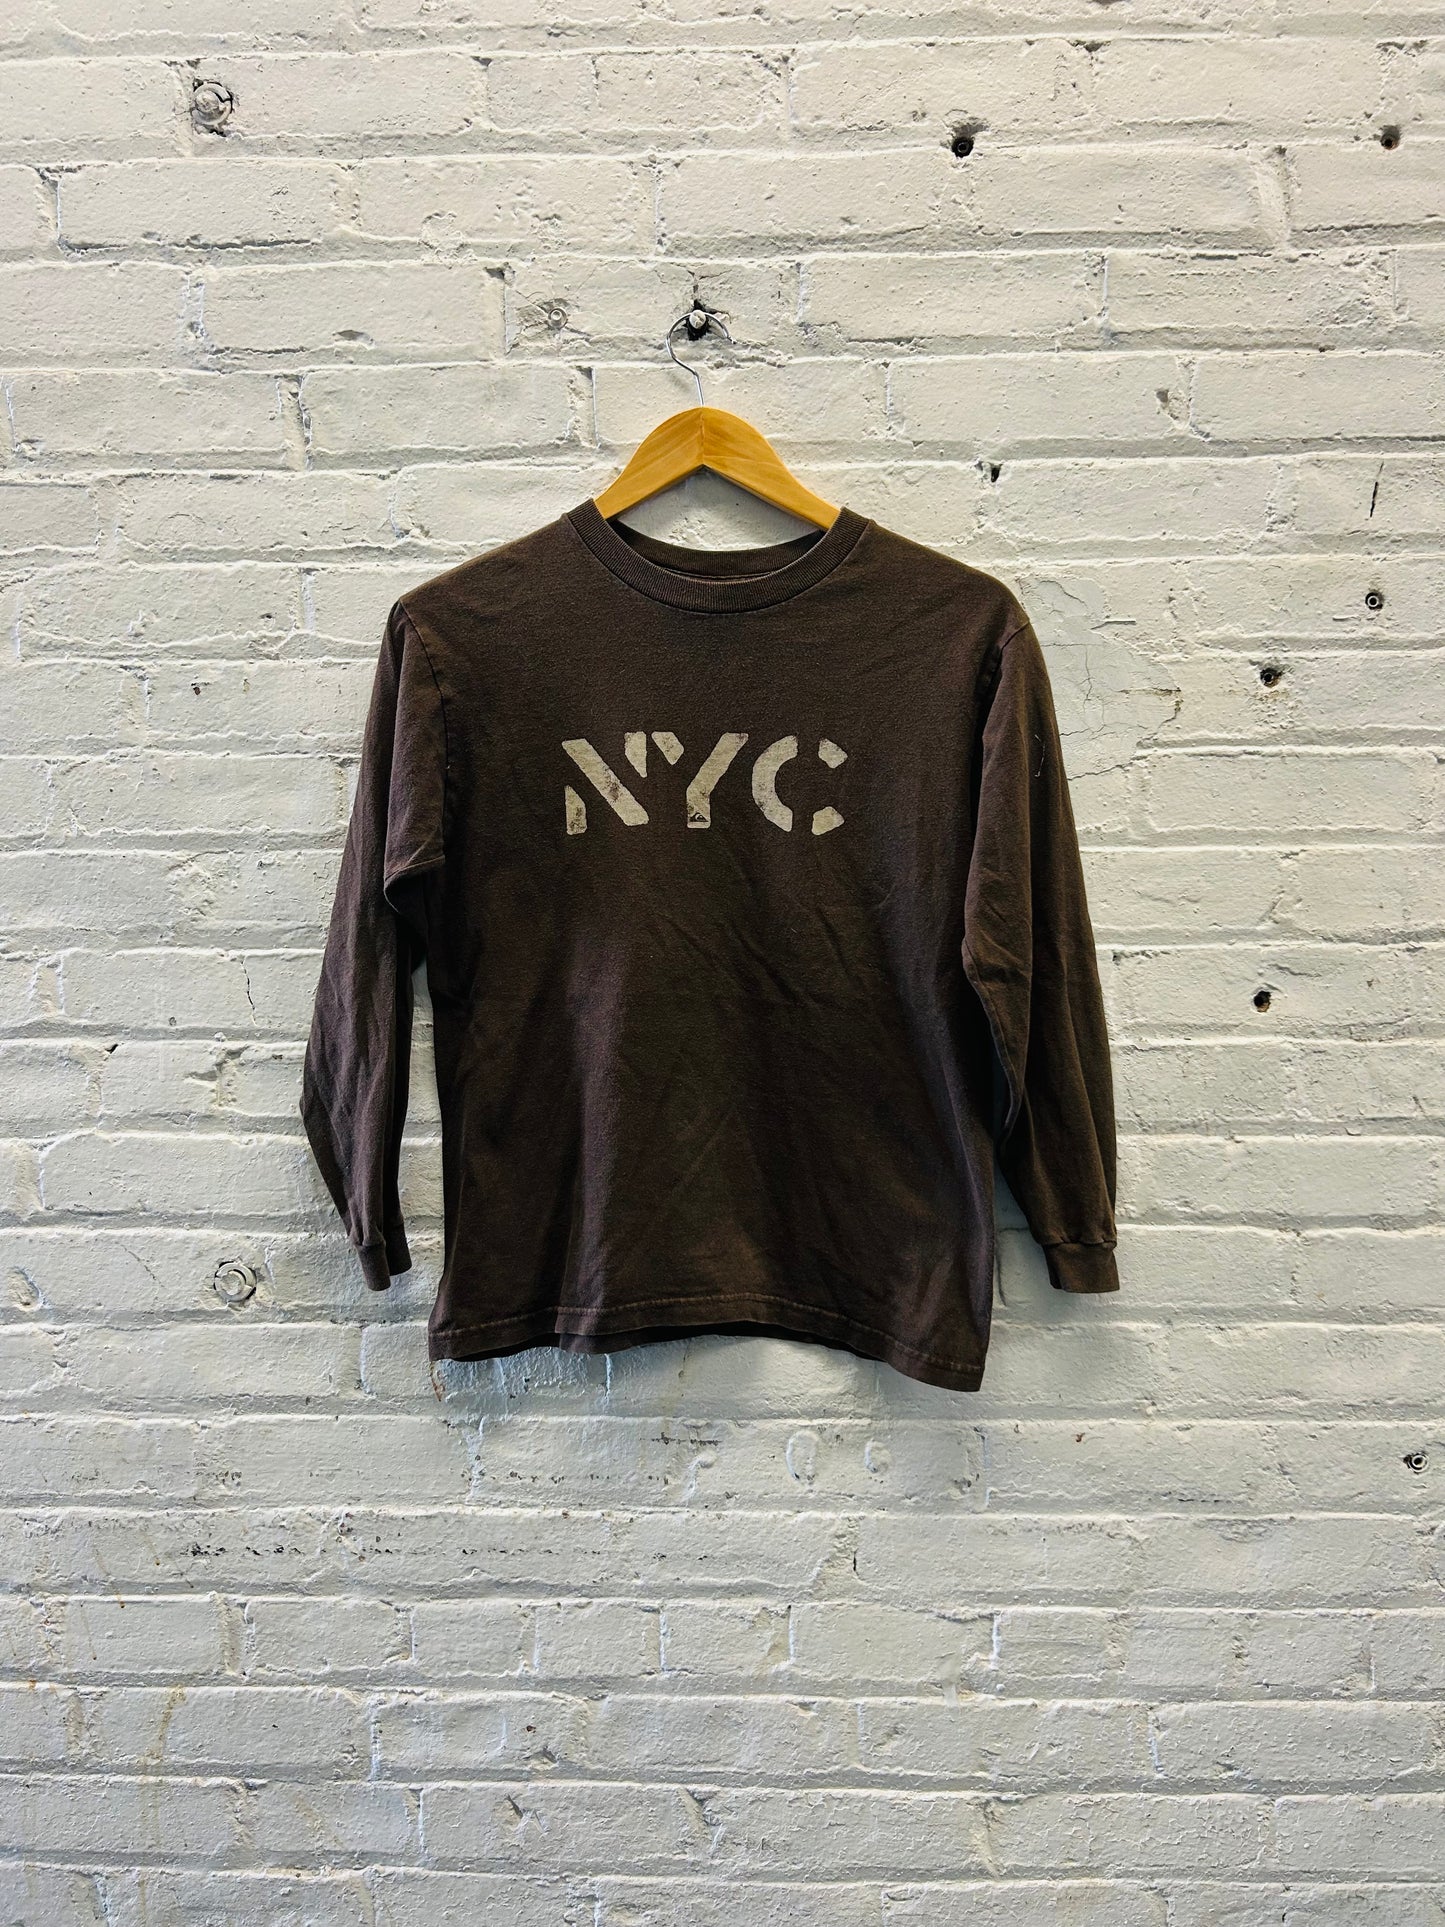 Quiksilver NYC Tee - Small